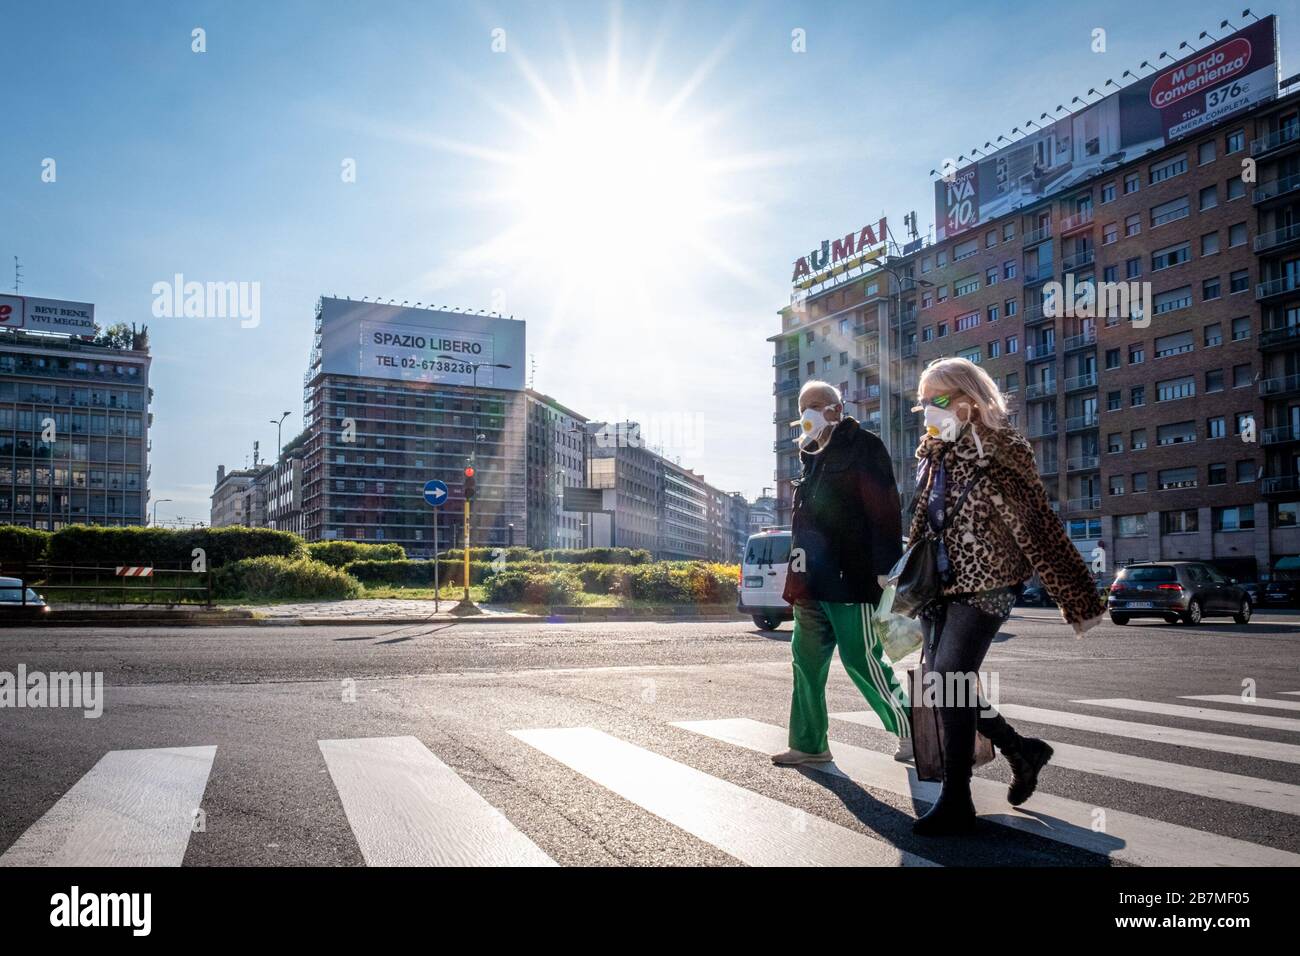 Milan - Coronavirus - An elderly man and woman with a mask cross the street in Piazzale Loreto Editorial Usage Only Stock Photo